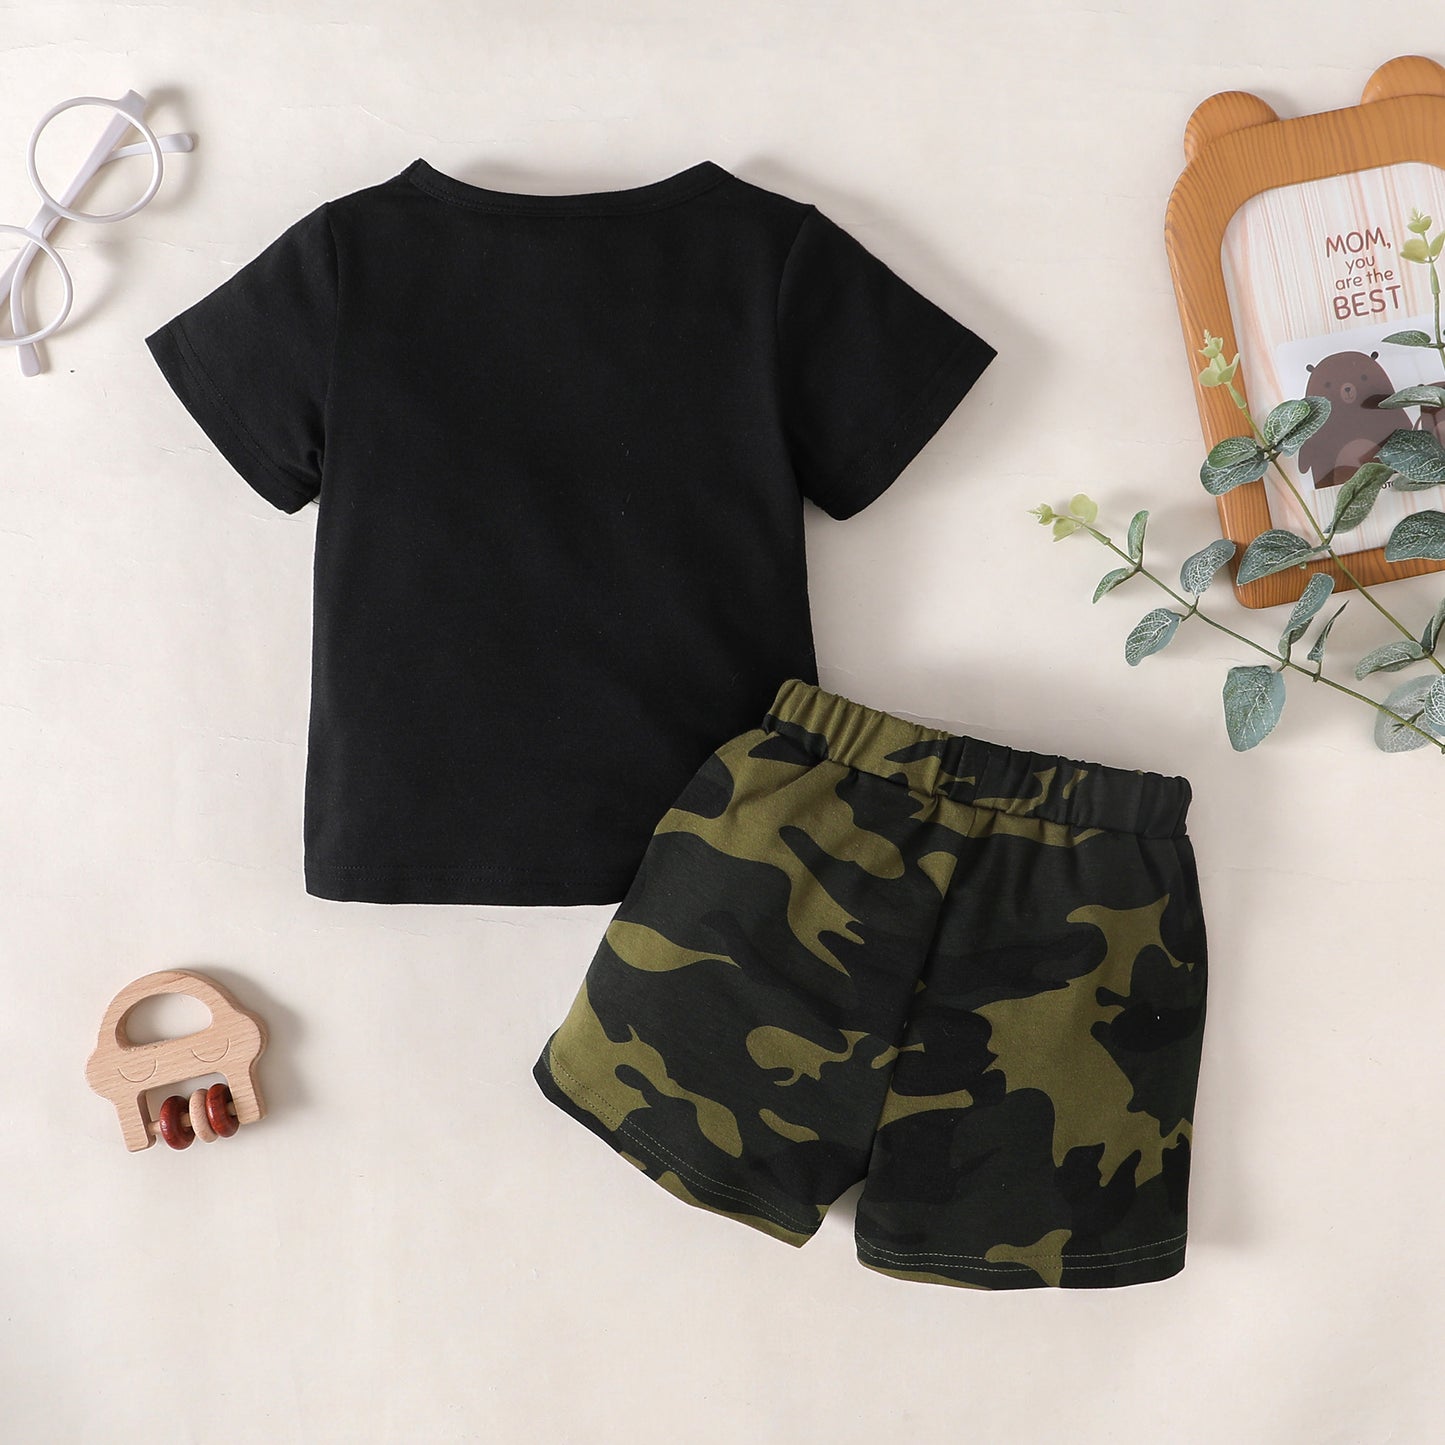 MAMA'S BOY Graphic T-Shirt and Camouflage Shorts Set - DromedarShop.com Online Boutique